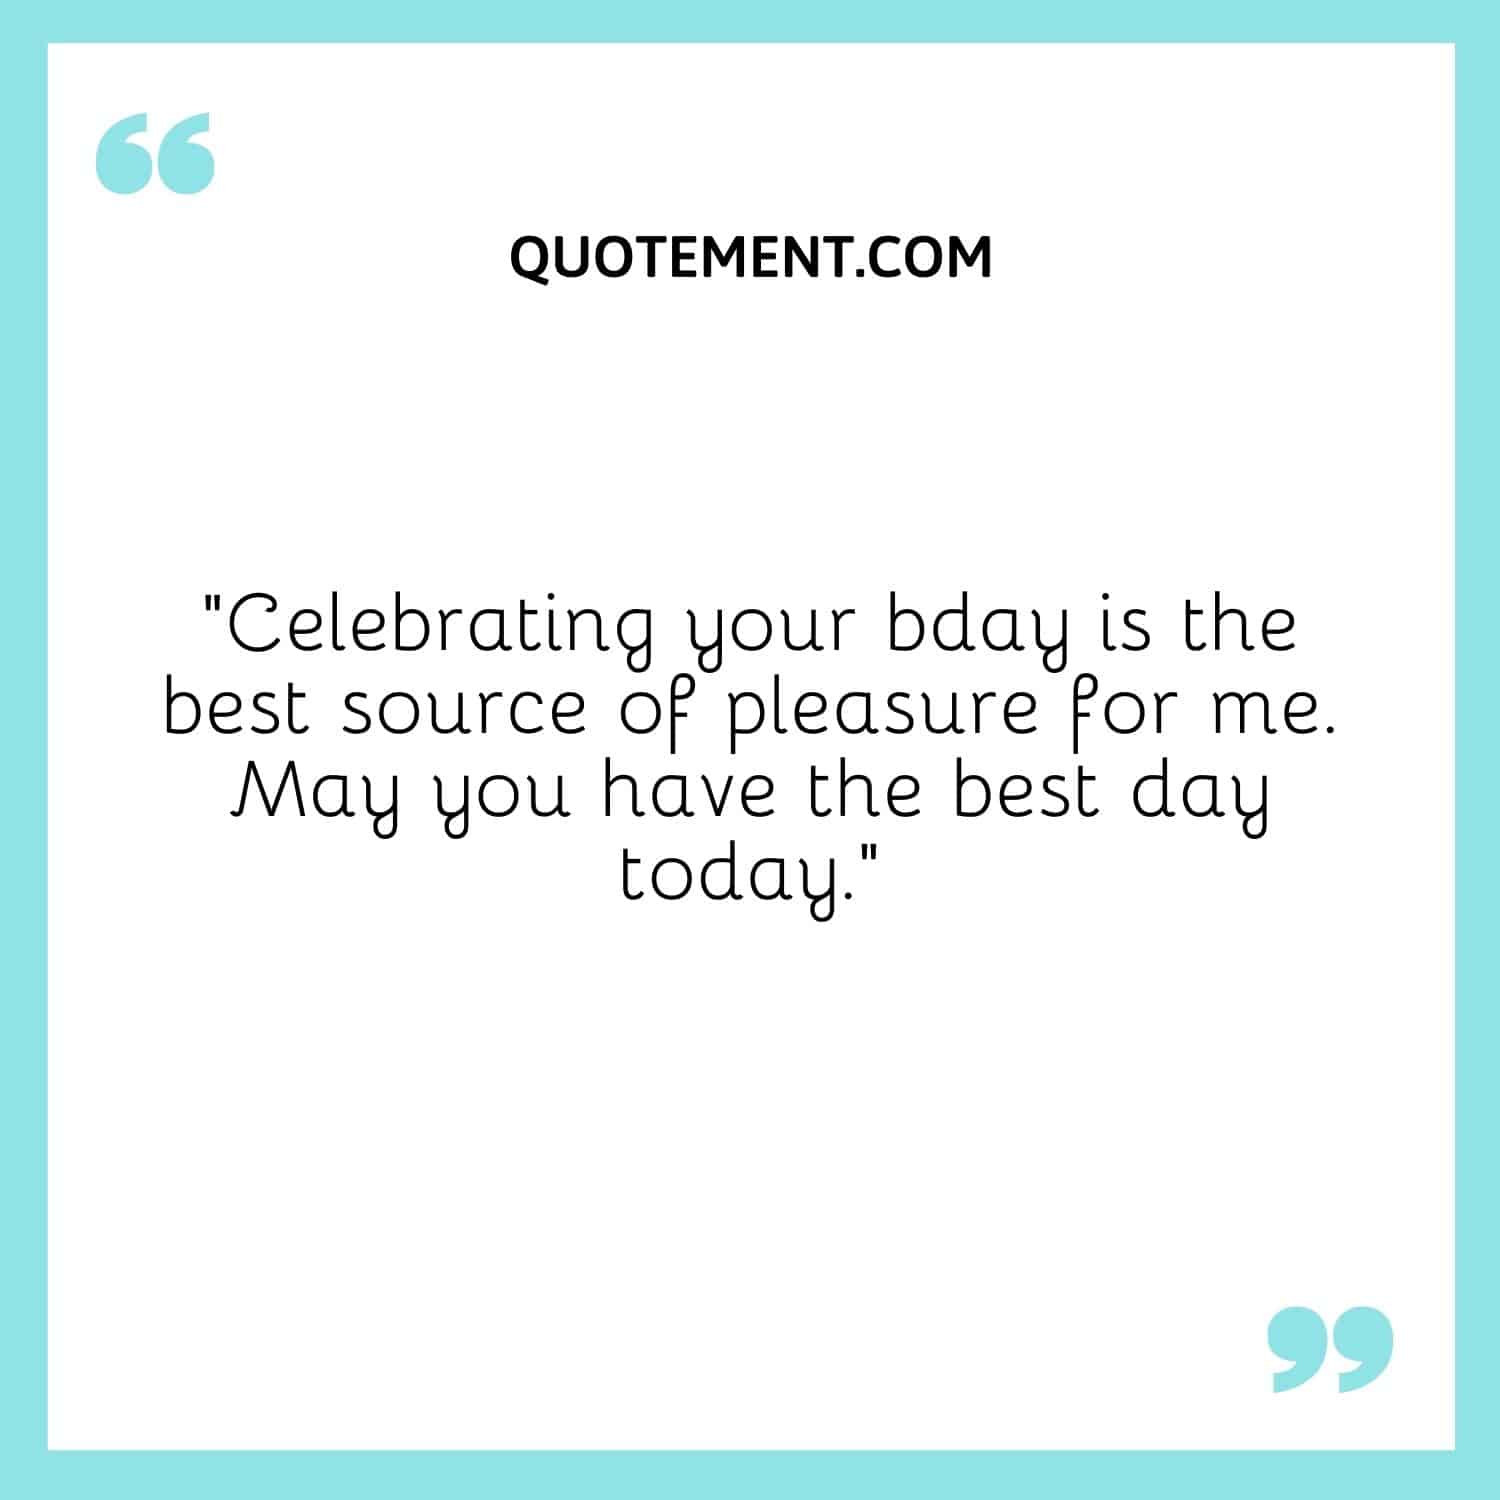 “Celebrating your bday is the best source of pleasure for me. May you have the best day today.”